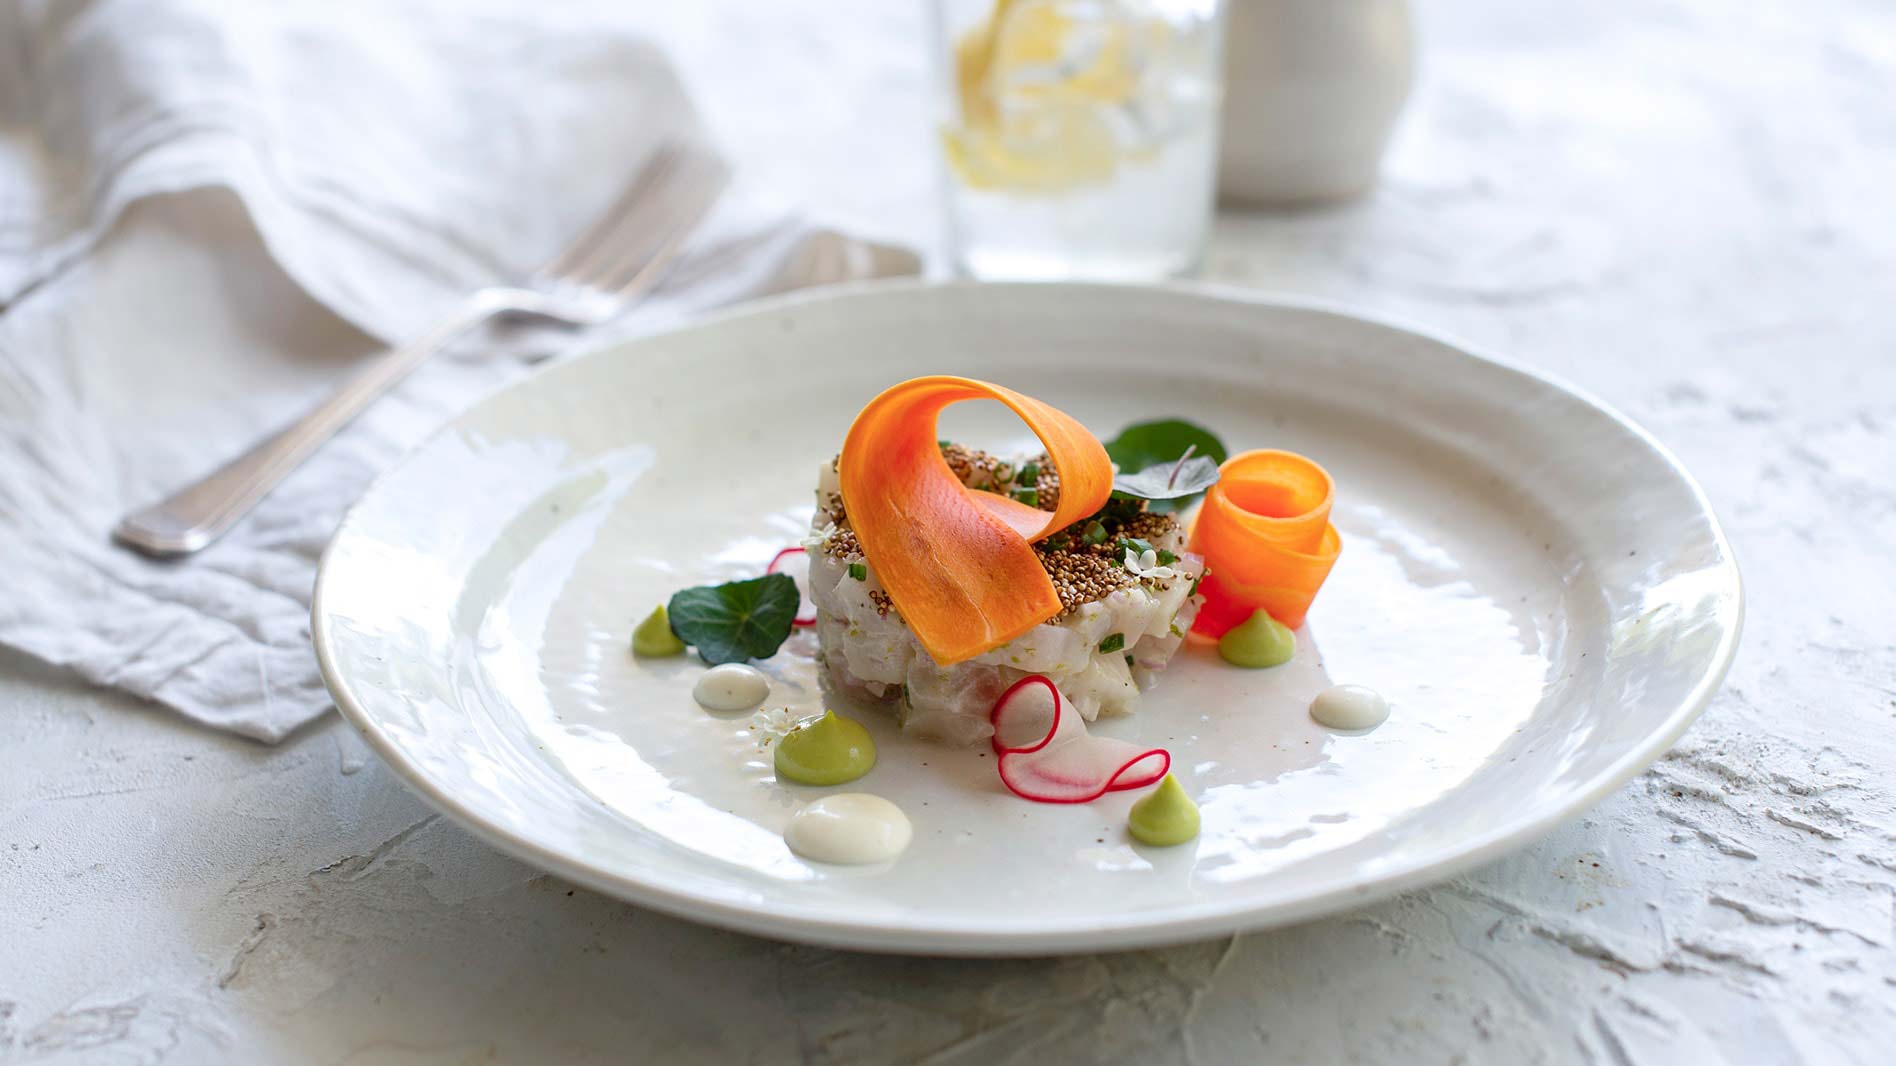 Kingfish ceviche with pickled vegetables